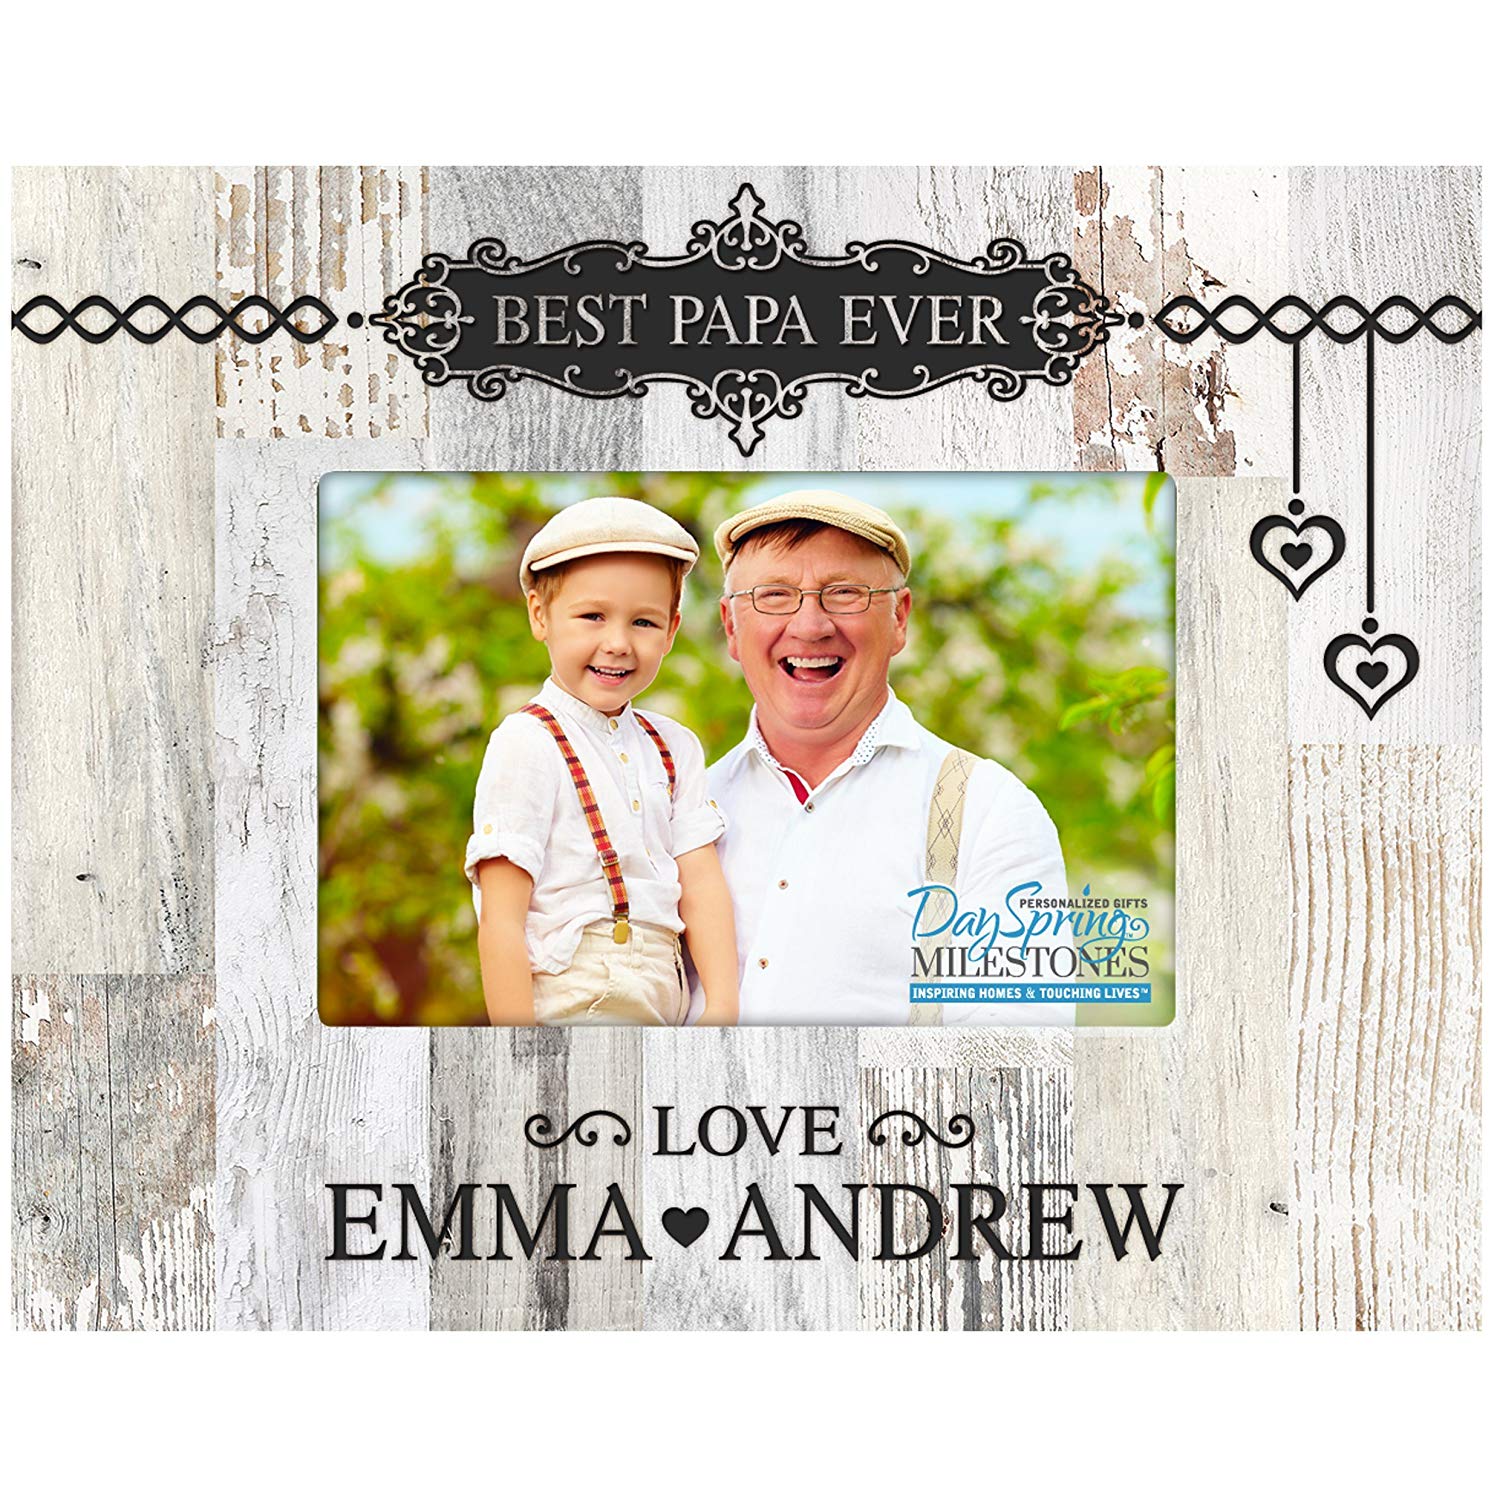 Personalized Father Birthday Photo Frame Gift - Best Papa Ever - LifeSong Milestones